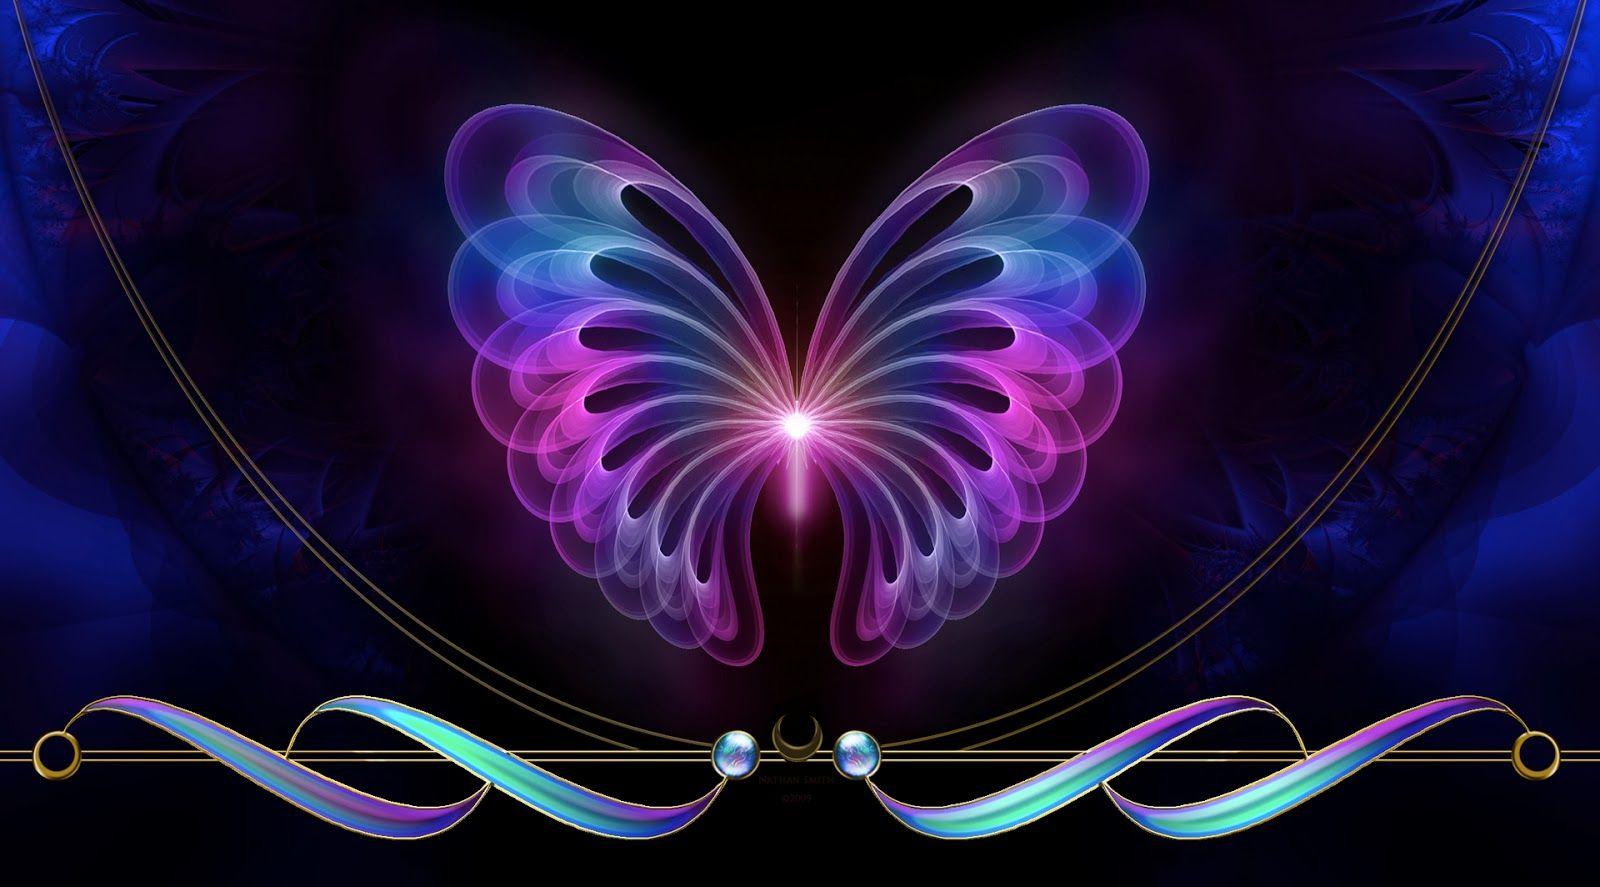 Abstract butterfly desktop background Wallpaper Free Download